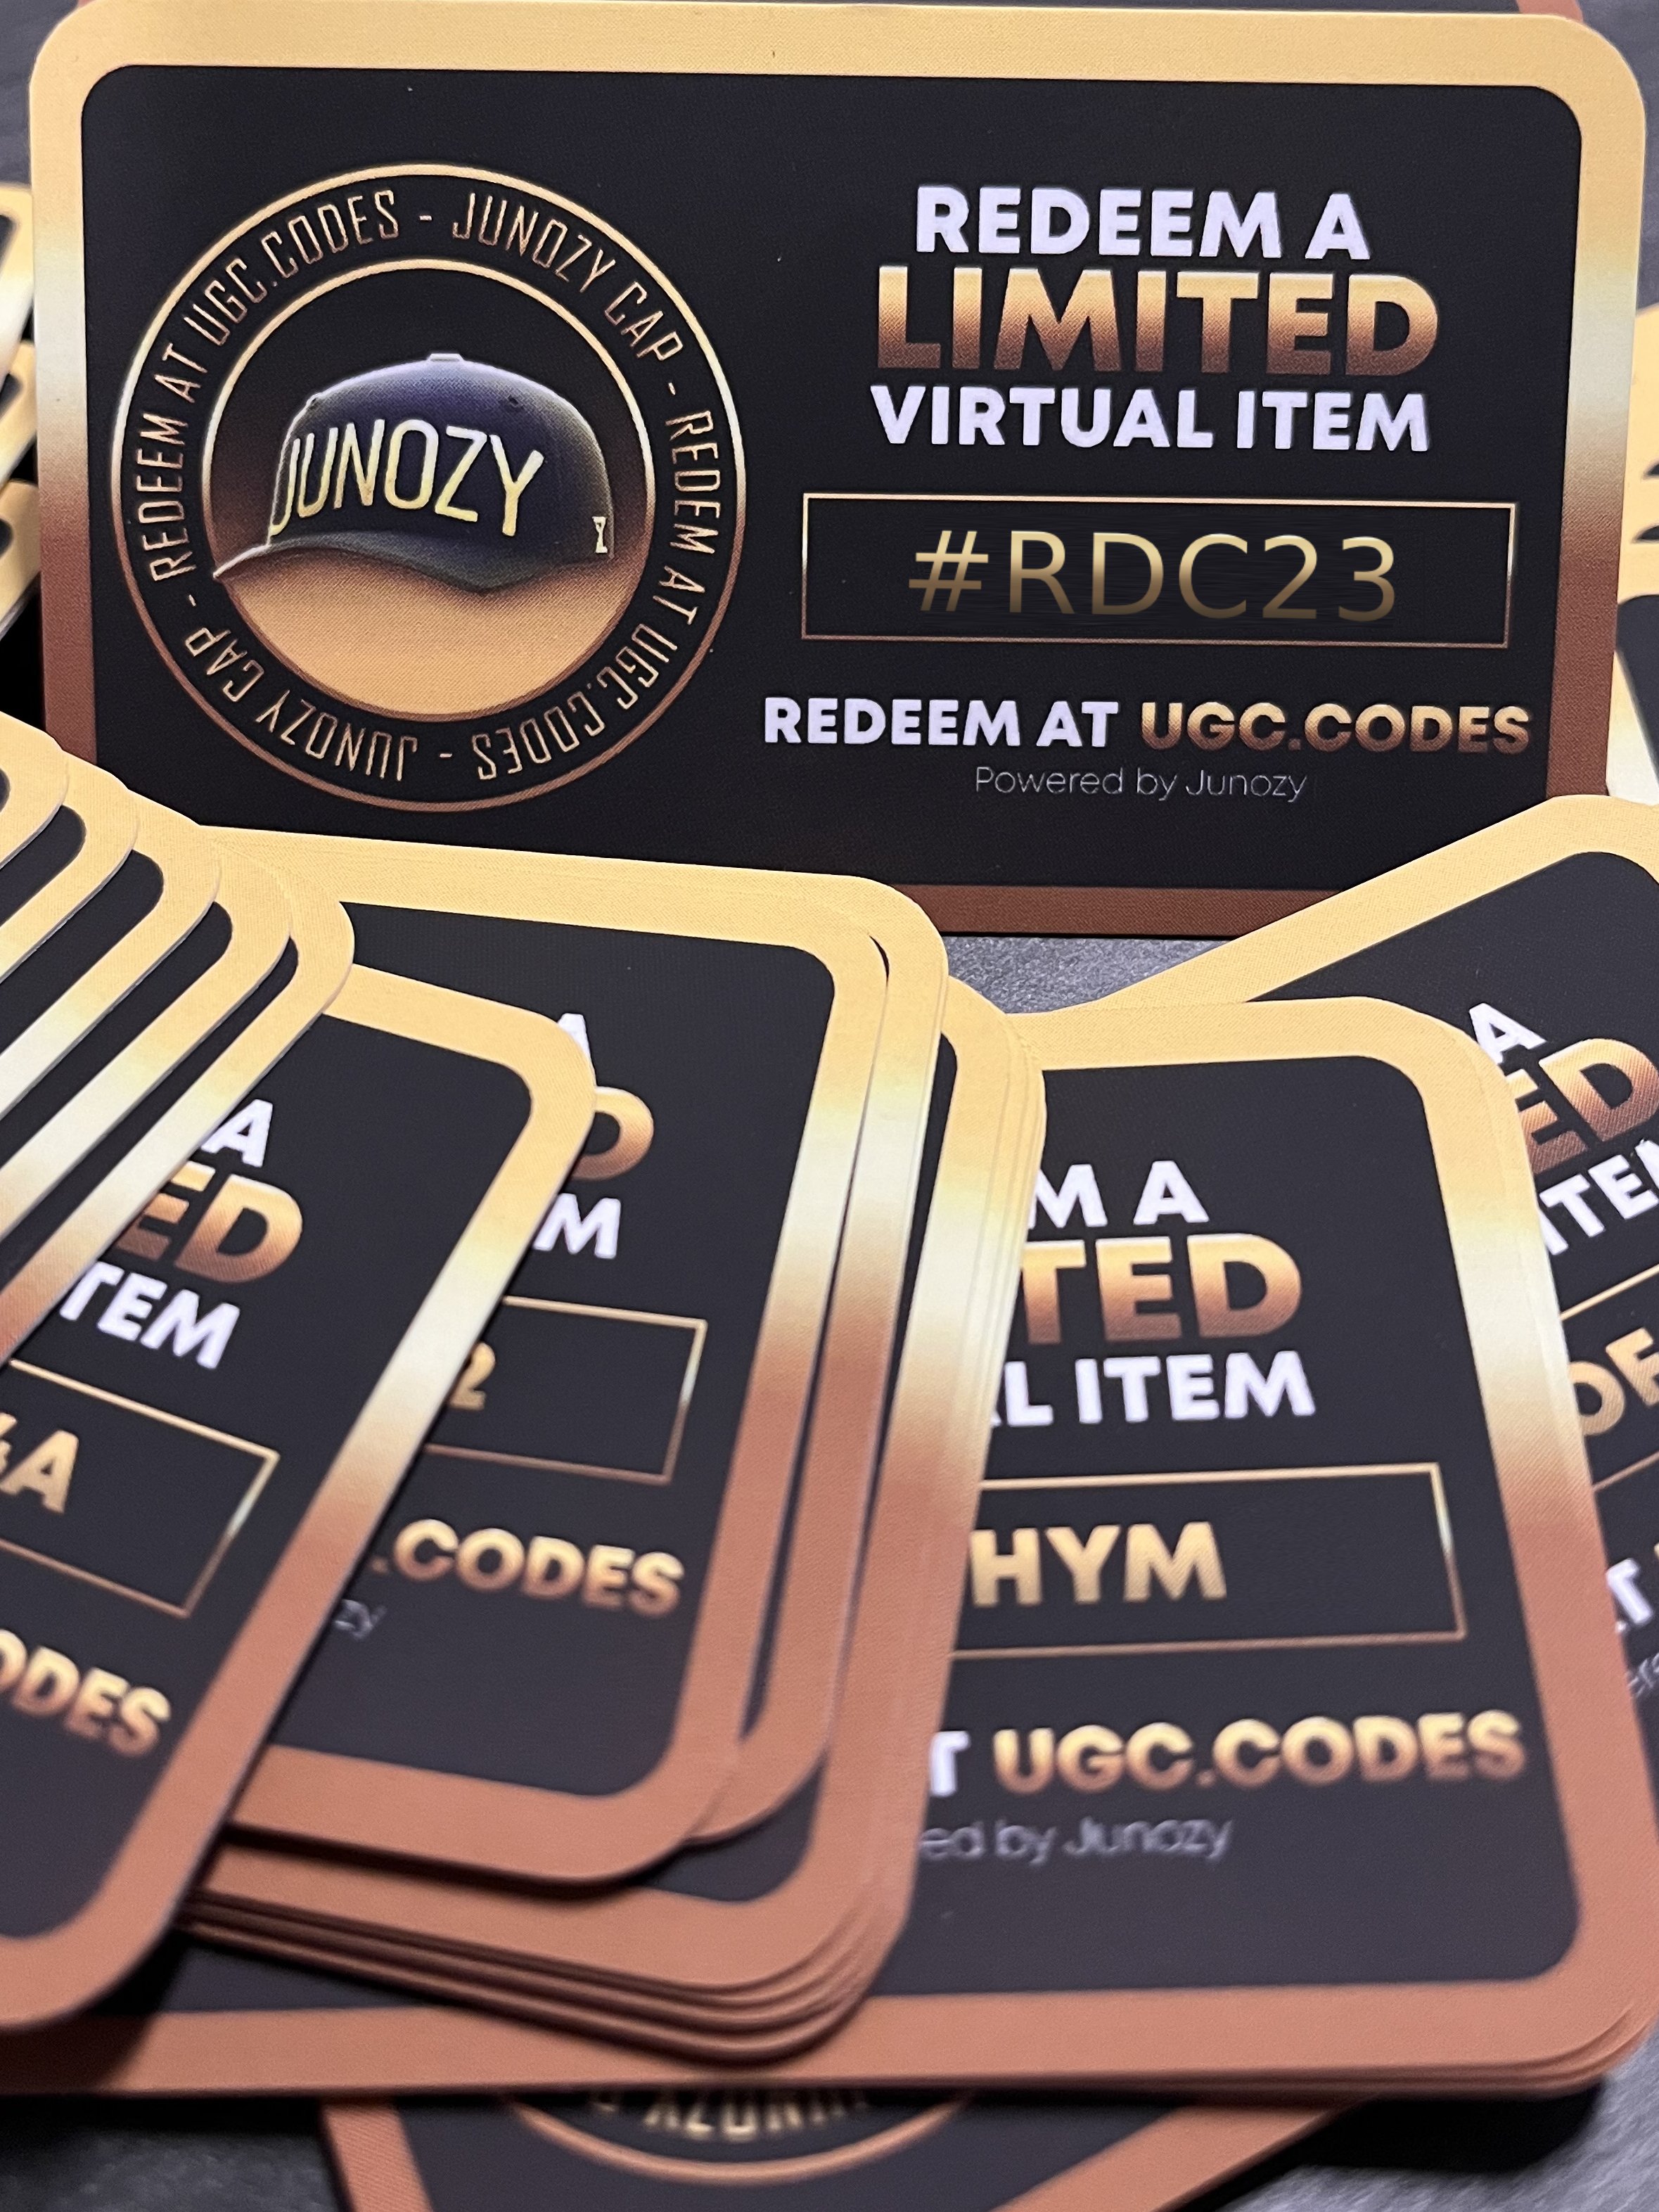 Xenonic_778 #SaveUGC 🫠 on X: Redeem codes to win free UGC Limiteds! 🛍  I'll be giving out codes at  and on Twitter, through  puzzles and giveaways 🔥 so follow me! 👉